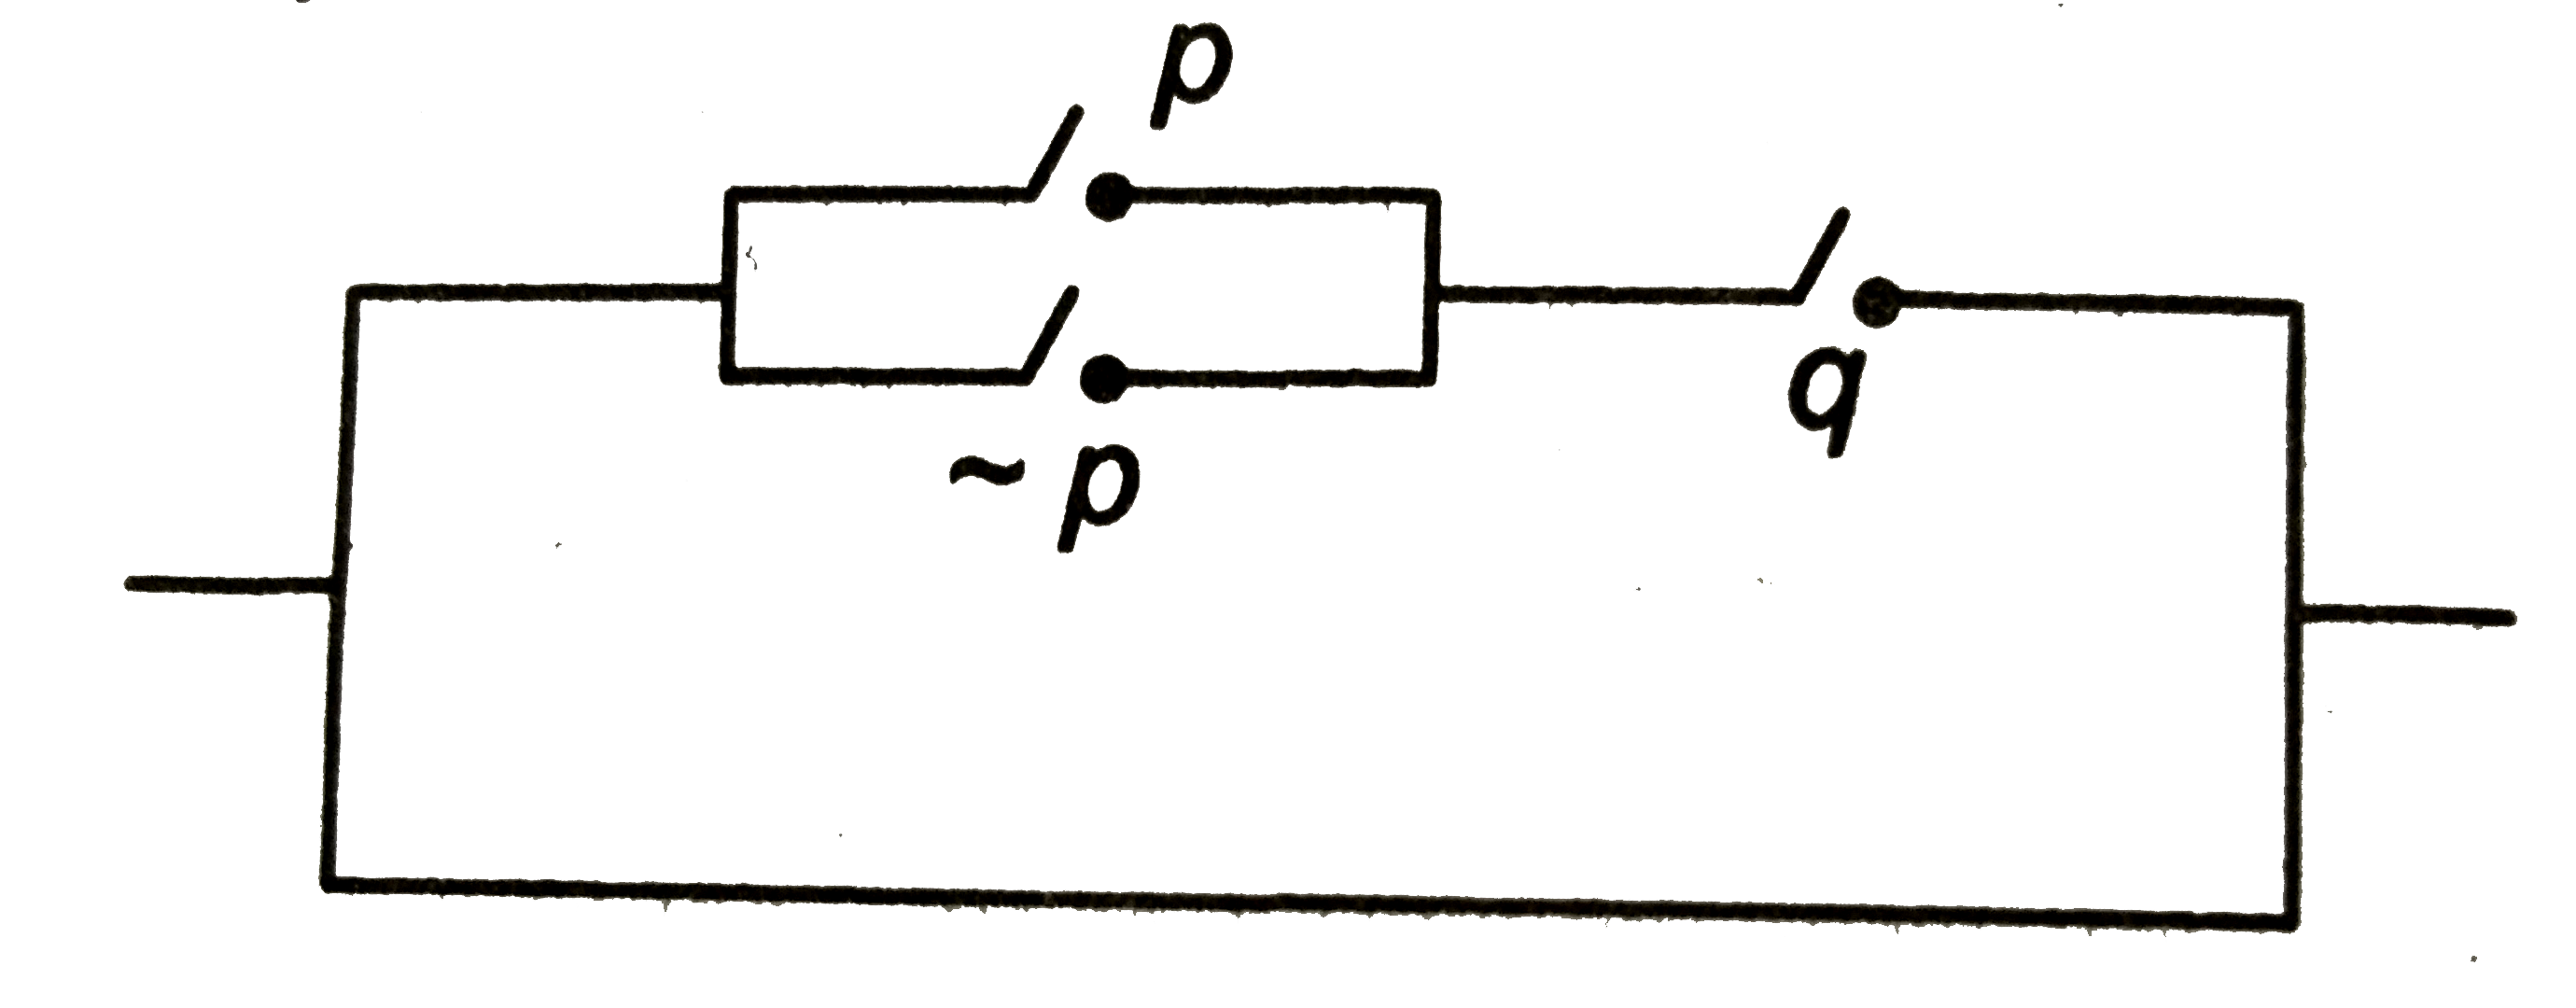 The output of the following circuit is